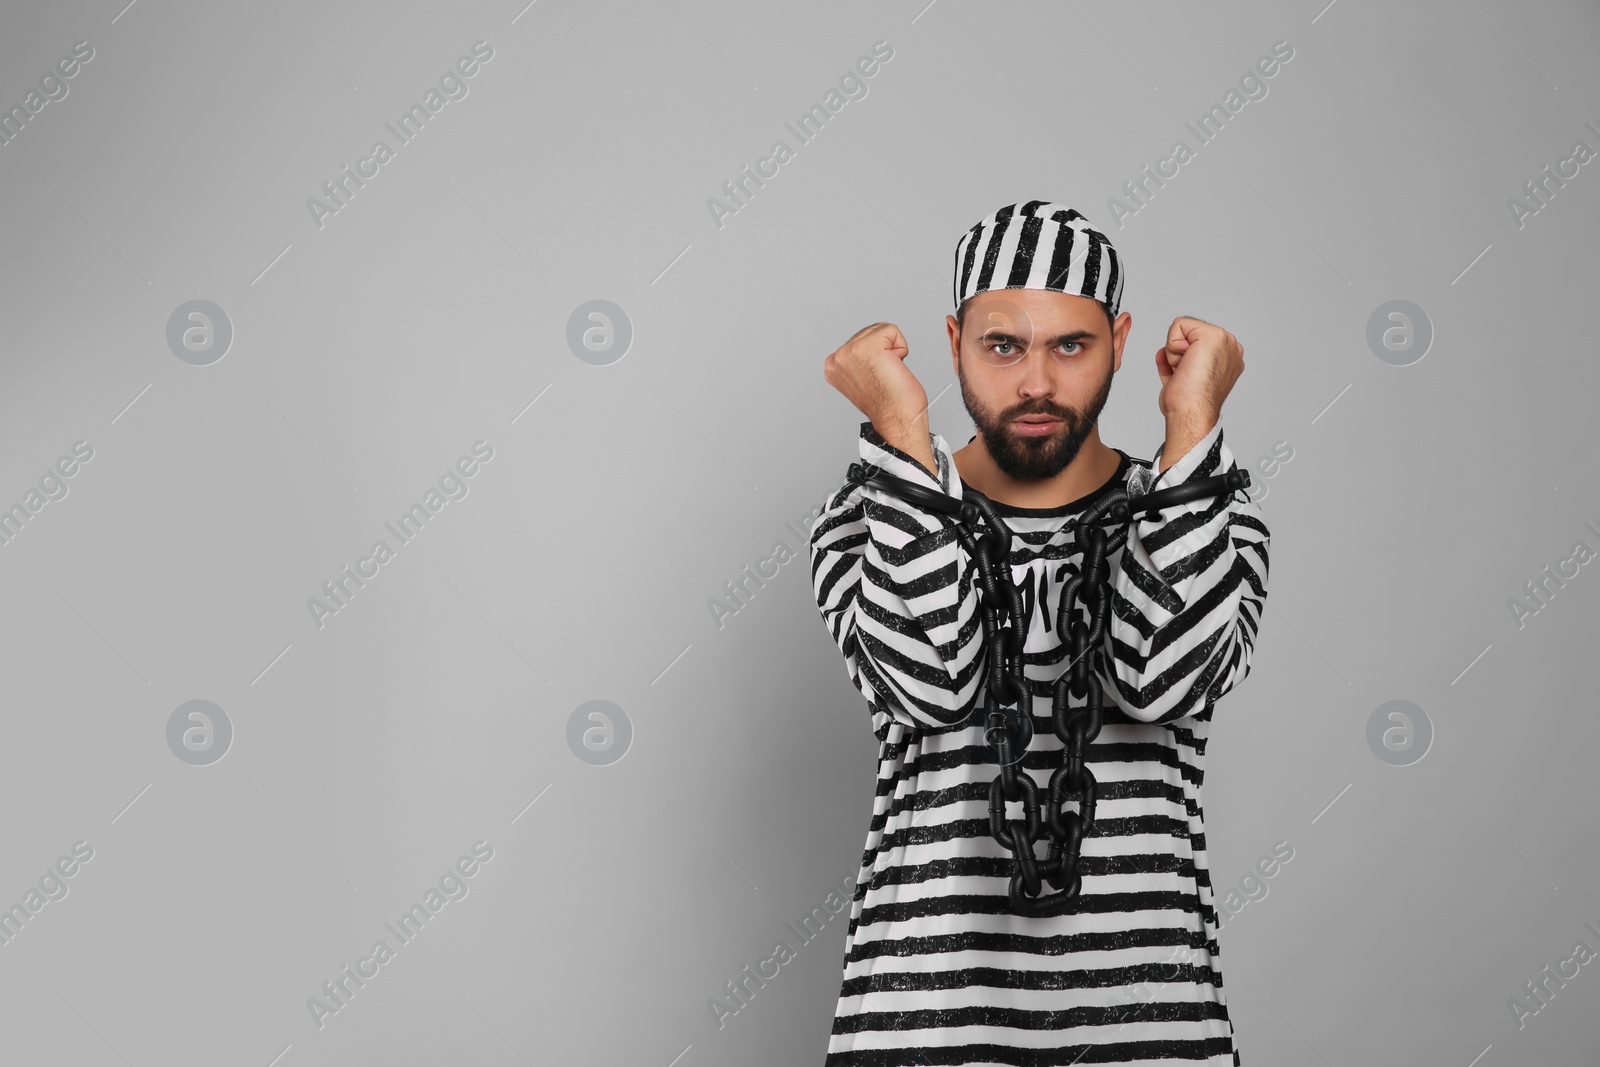 Photo of Prisoner in special uniform with chained hands on grey background, space for text